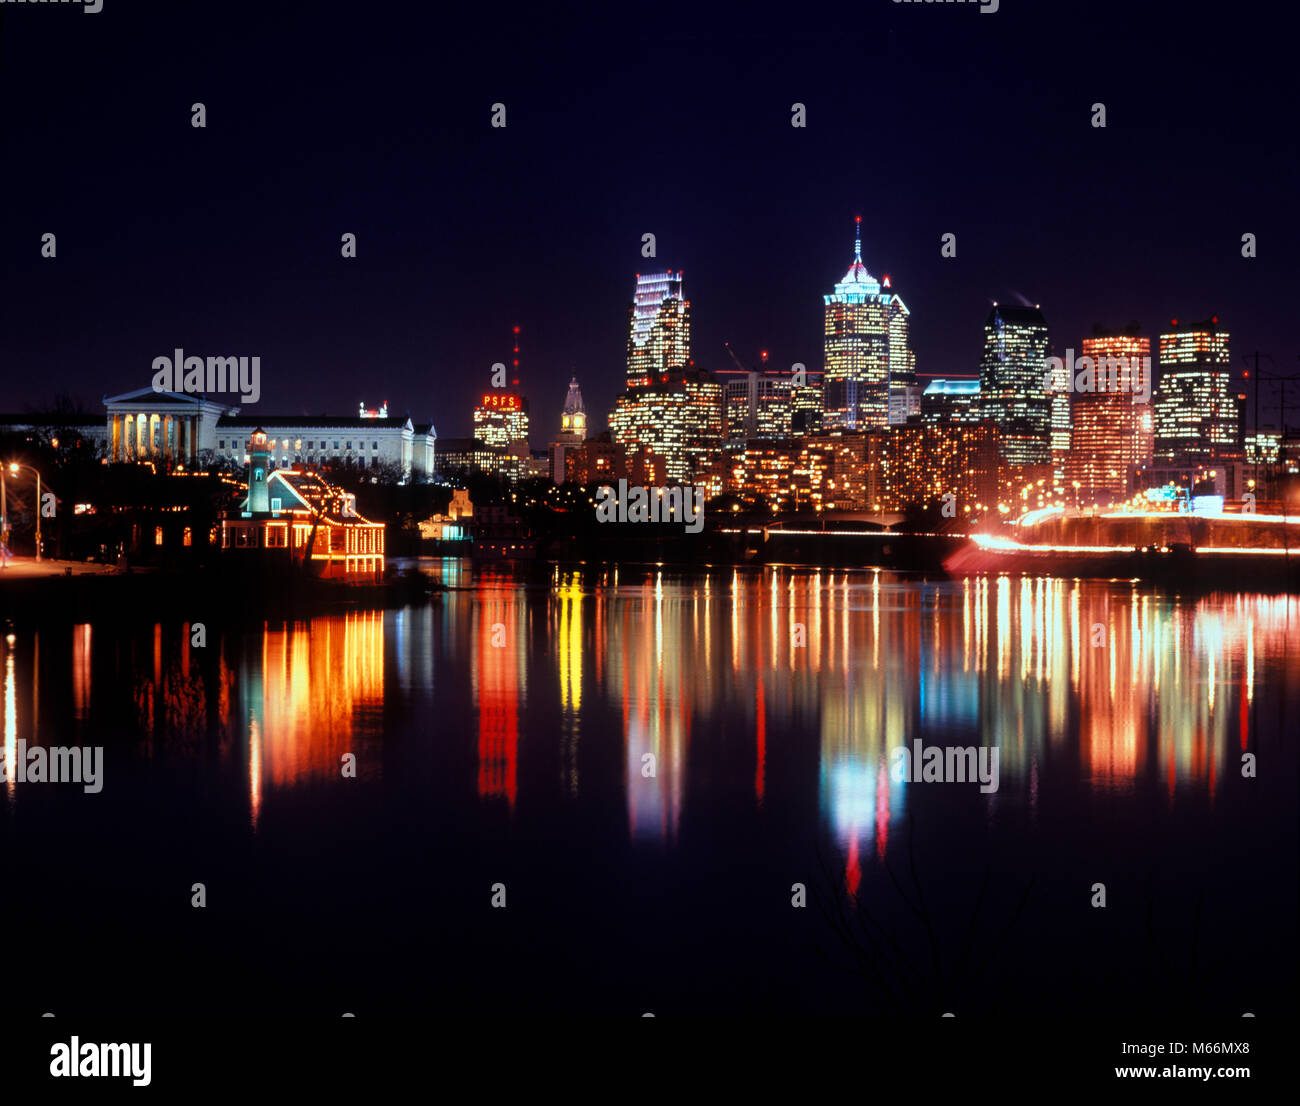 1990s CITY SKYLINE AT NIGHT WITH BELL ATLANTIC TOWER LIBERTY PLACE ART MUSEUM PHILADELPHIA PENNSYLVANIA USA - kp5687 DEG002 HARS CITIES KEYSTONE STATE EDIFICE NIGHTTIME ART MUSEUM BOATHOUSE ROW CITY OF BROTHERLY LOVE CRADLE OF LIBERTY LIBERTY PLACE OLD FASHIONED Stock Photo